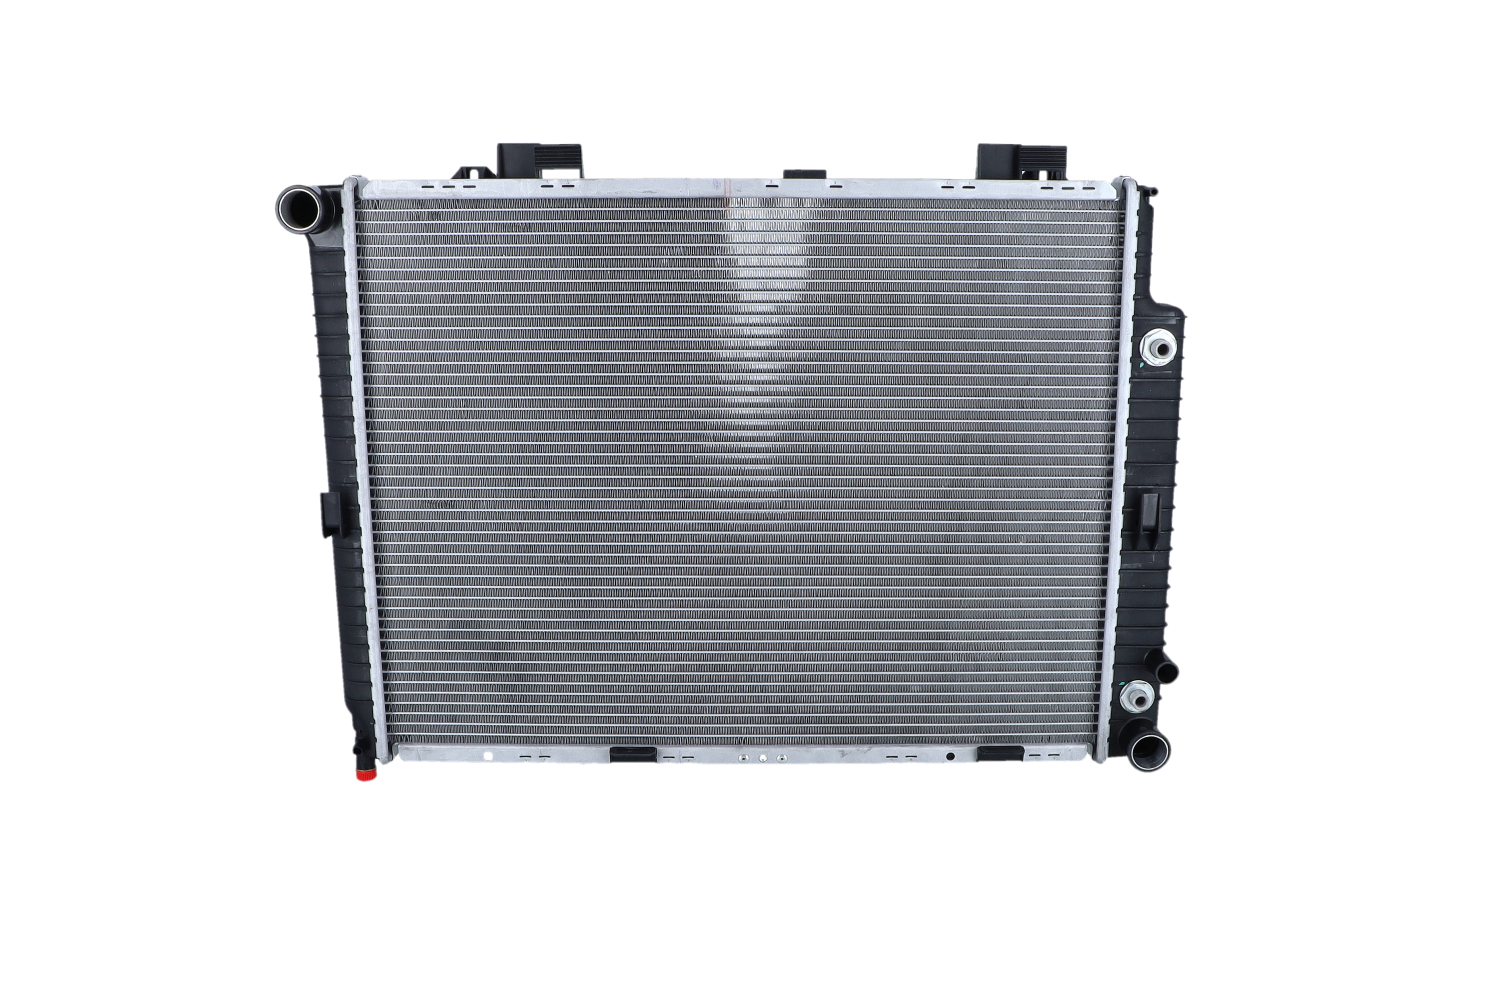 NRF 58100 Engine radiator Aluminium, 640 x 484 x 34 mm, with mounting parts, Brazed cooling fins